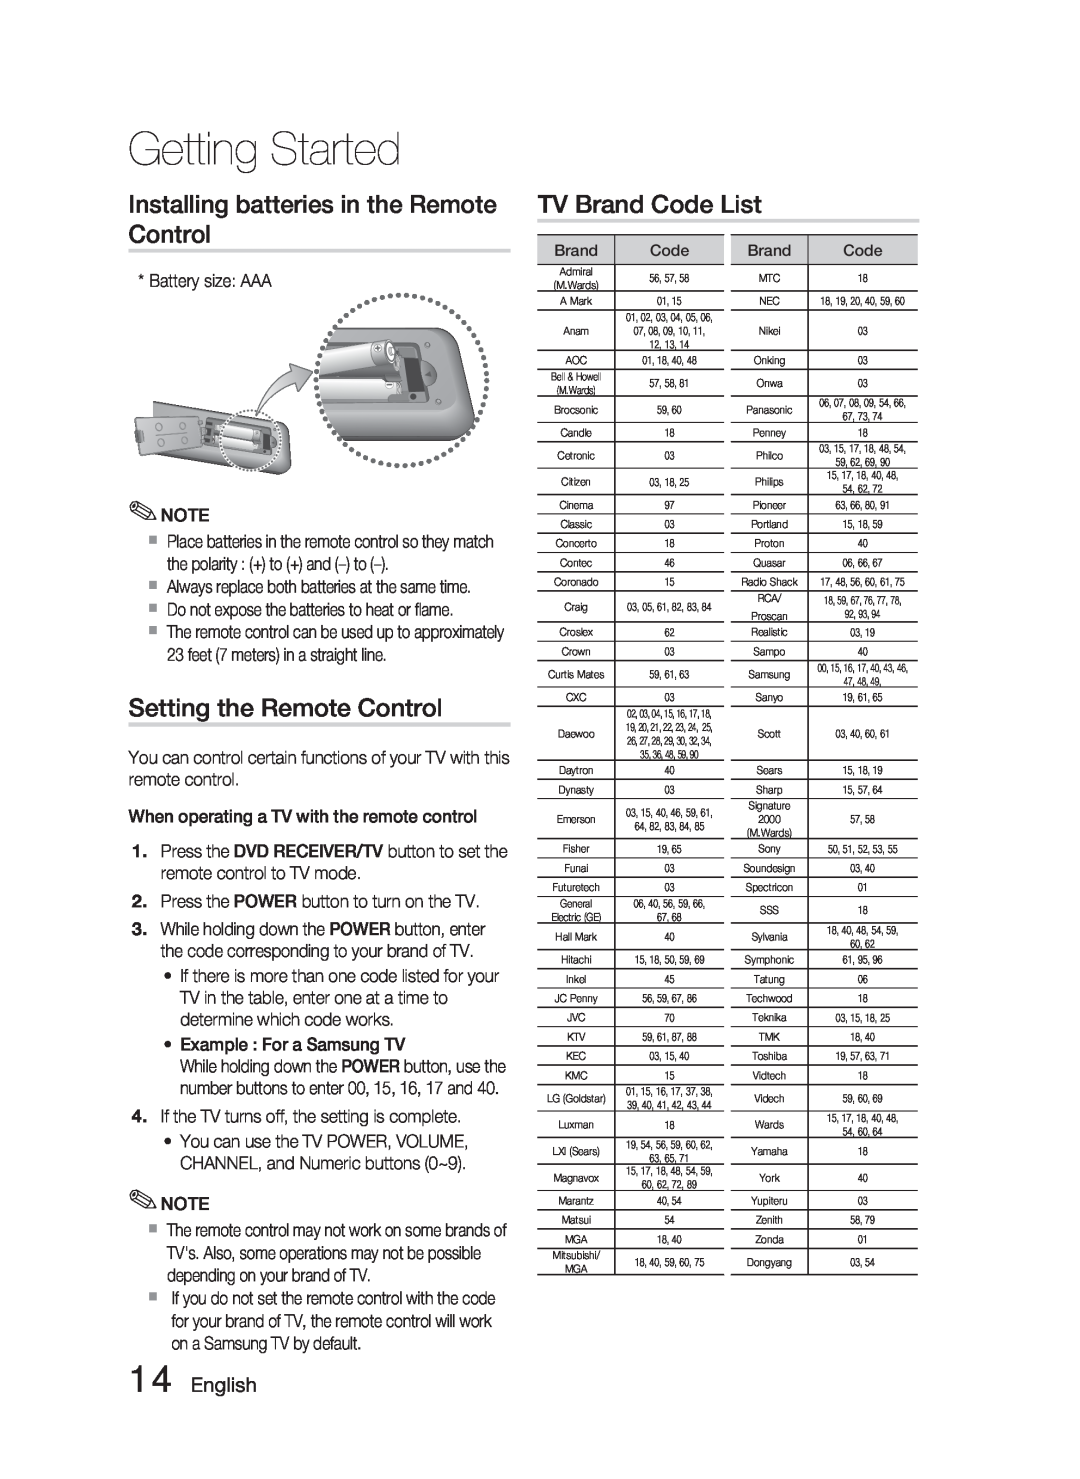 Samsung HT-C550-XAC Installing batteries in the Remote Control, TV Brand Code List, Setting the Remote Control, English 